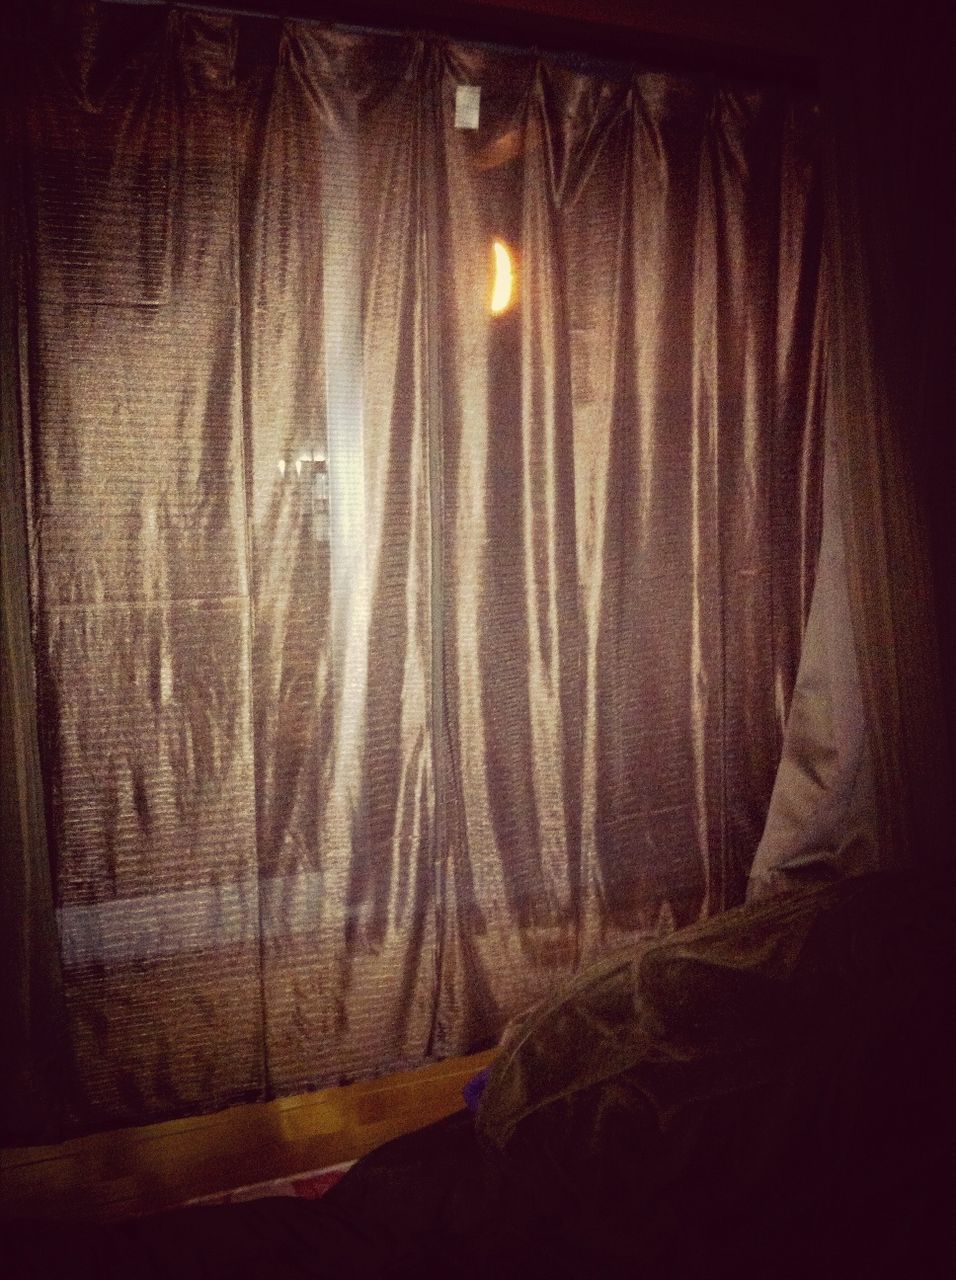 indoors, night, illuminated, dark, light - natural phenomenon, curtain, no people, auto post production filter, close-up, pattern, window, transfer print, home interior, full frame, textured, backgrounds, glowing, wall - building feature, textile, nature